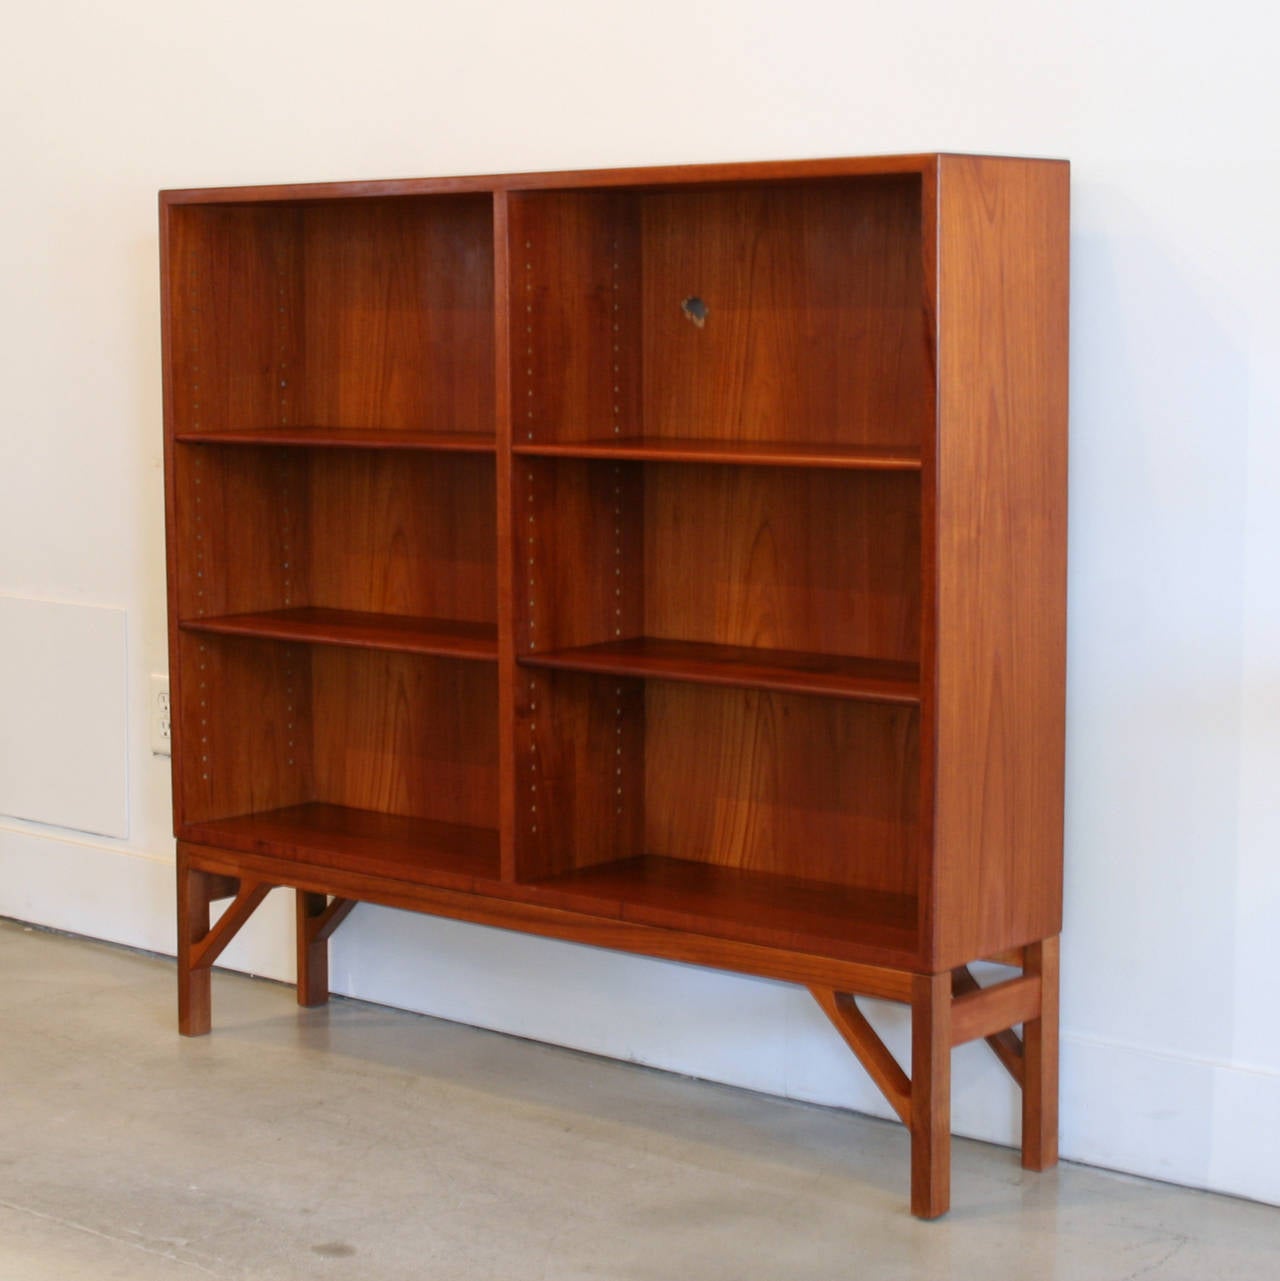 Low and wide vintage teak bookcase by Borge Mogensen. Adjustable shelves with beveled edge. Resting on solid teak legs. Two available, sold individually. Made in Denmark.